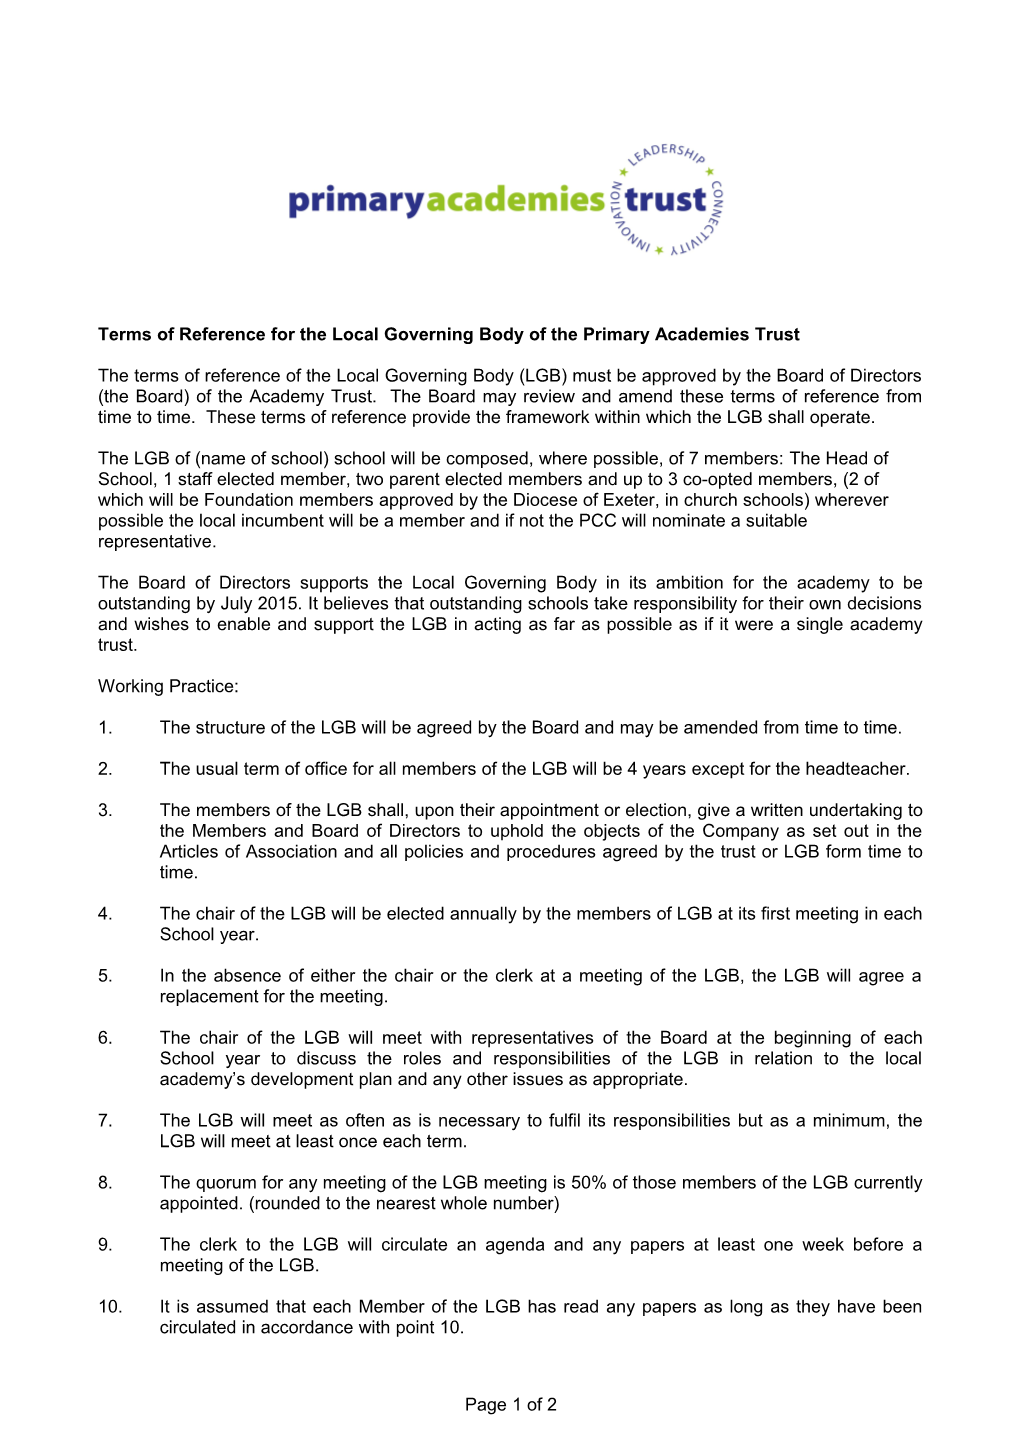 Terms of Reference for the Local Governing Body of the Ilfracombe Academy